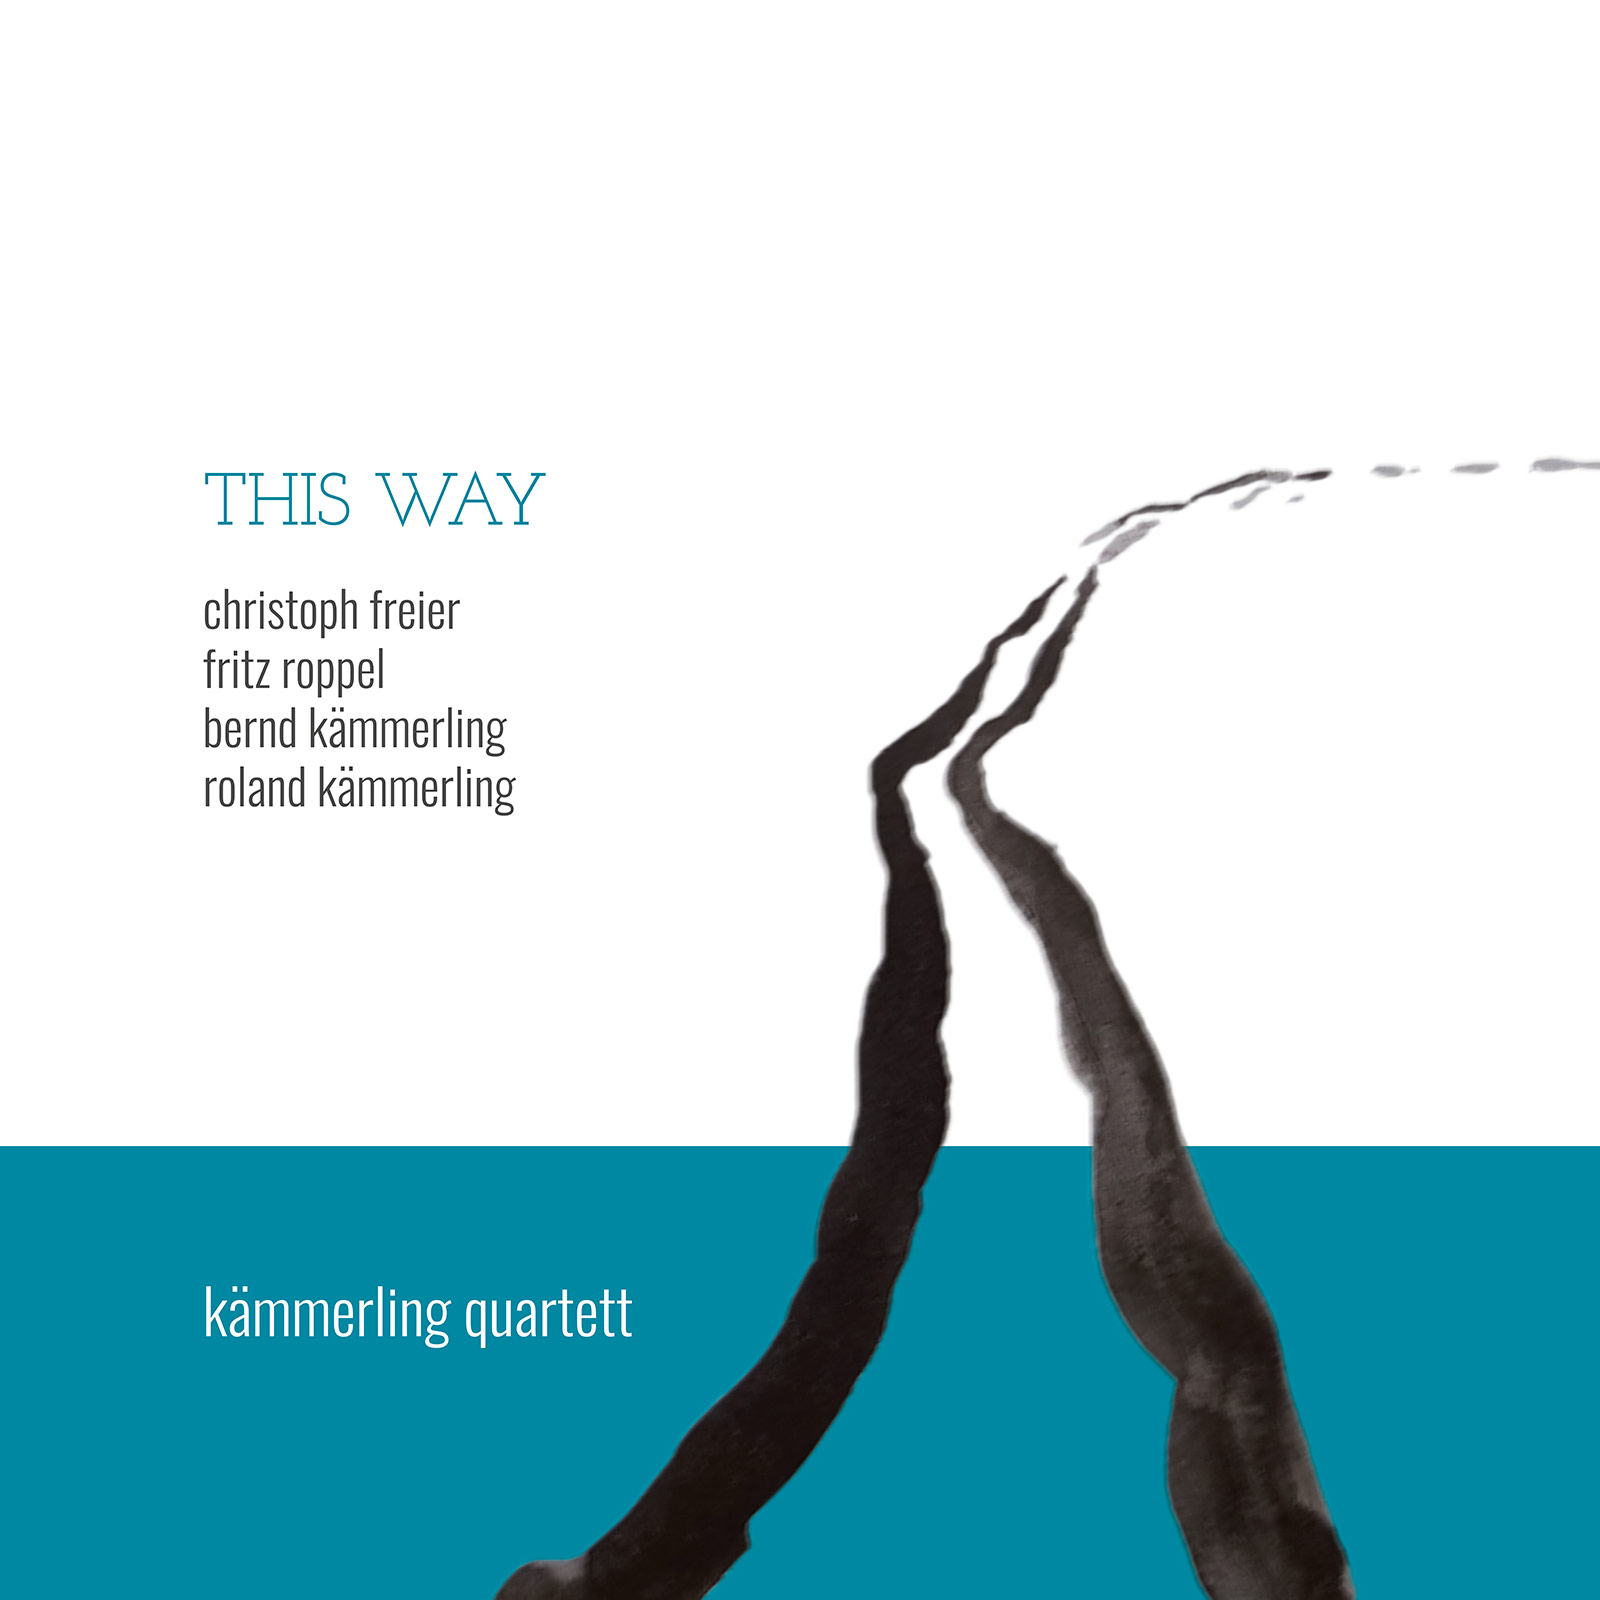 Albumcover "This Way" by Kämmerling Quartett